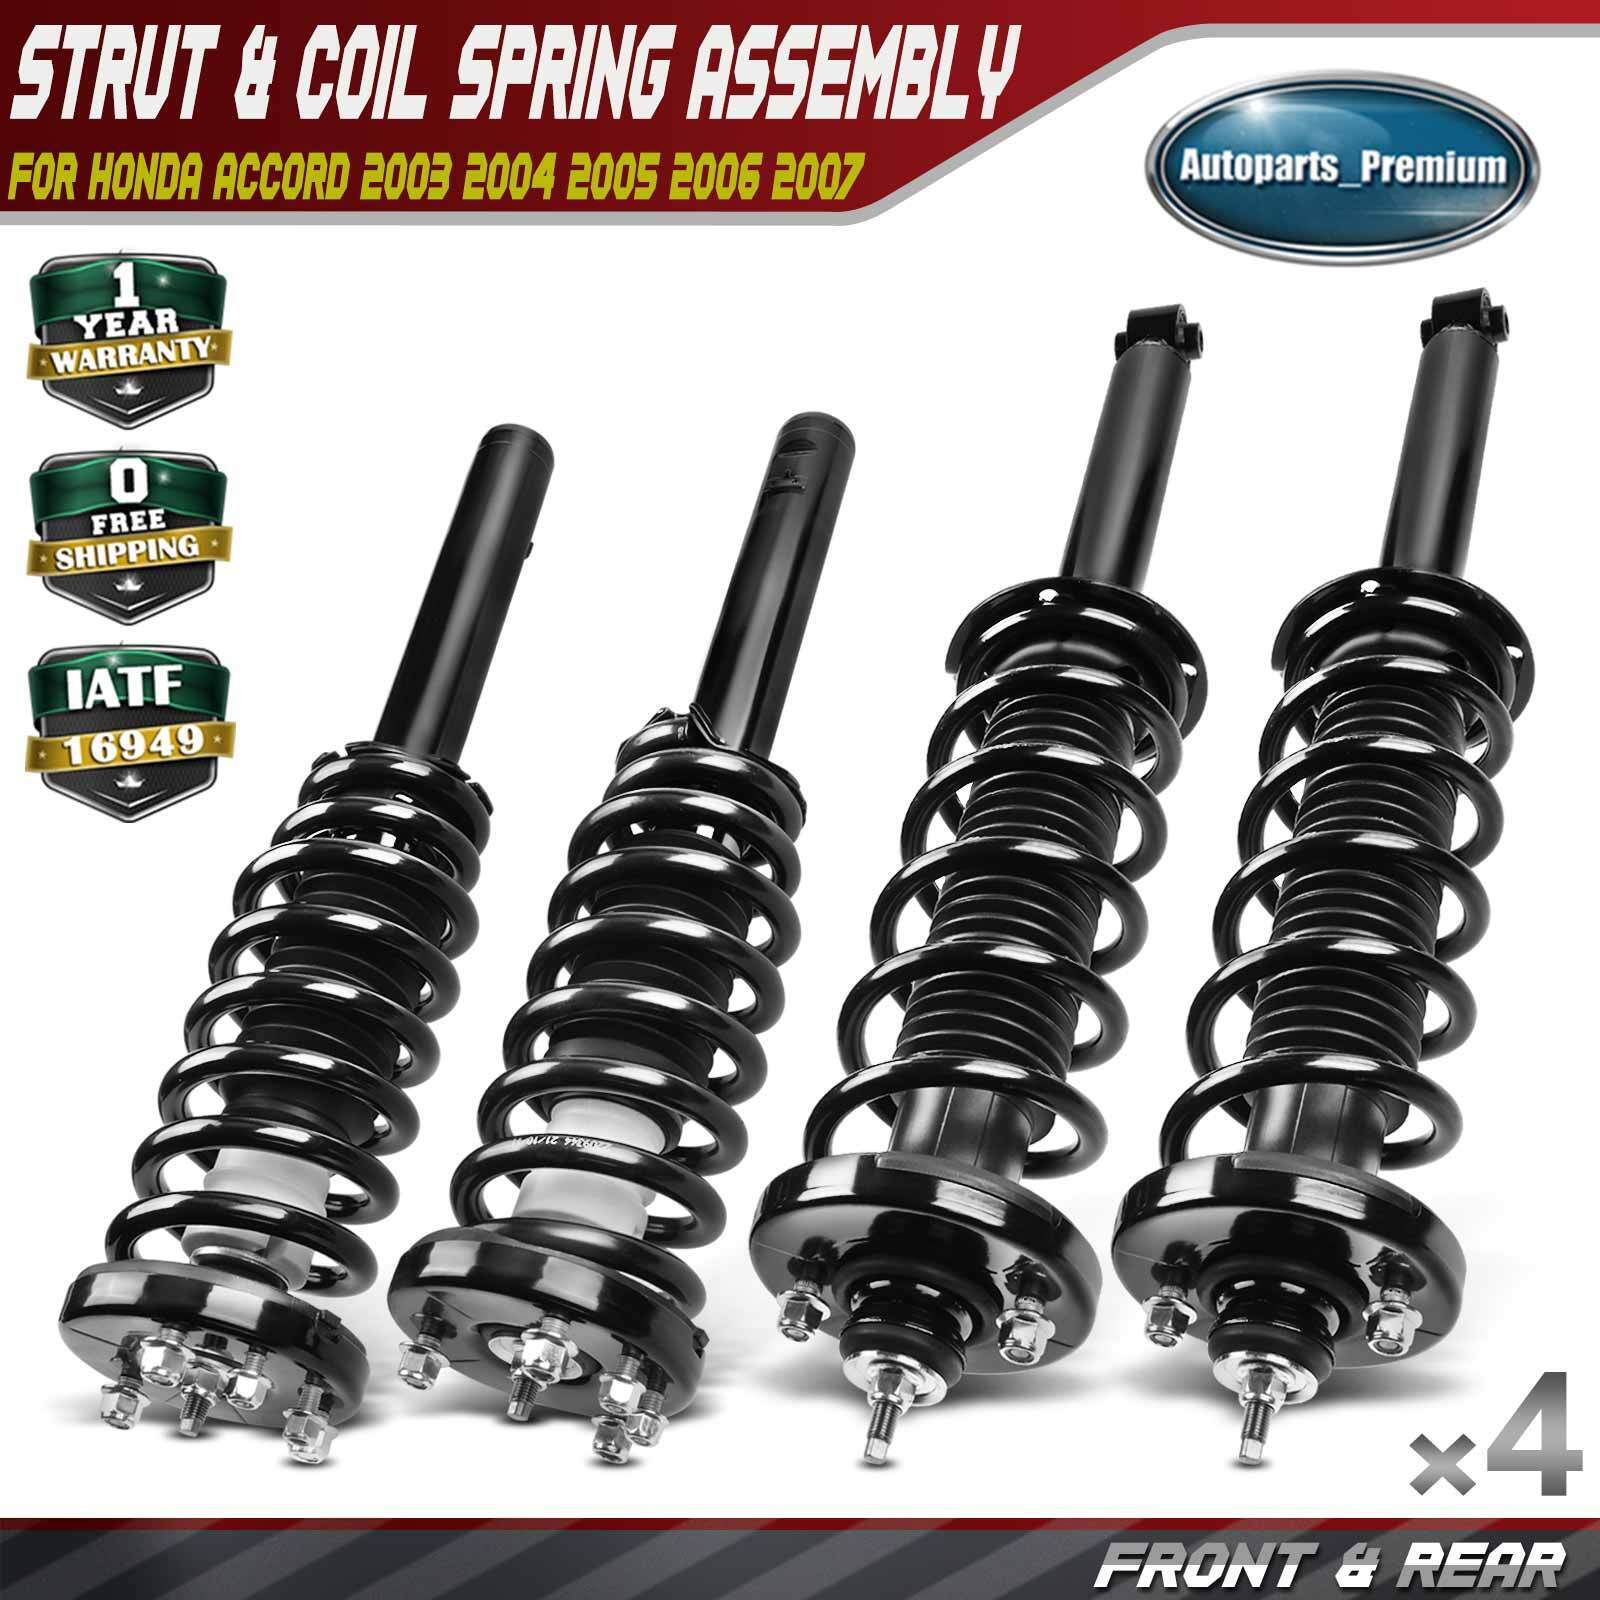 4x Front & Rear Complete Strut & Coil Spring Assembly for Honda Accord 2003-2007